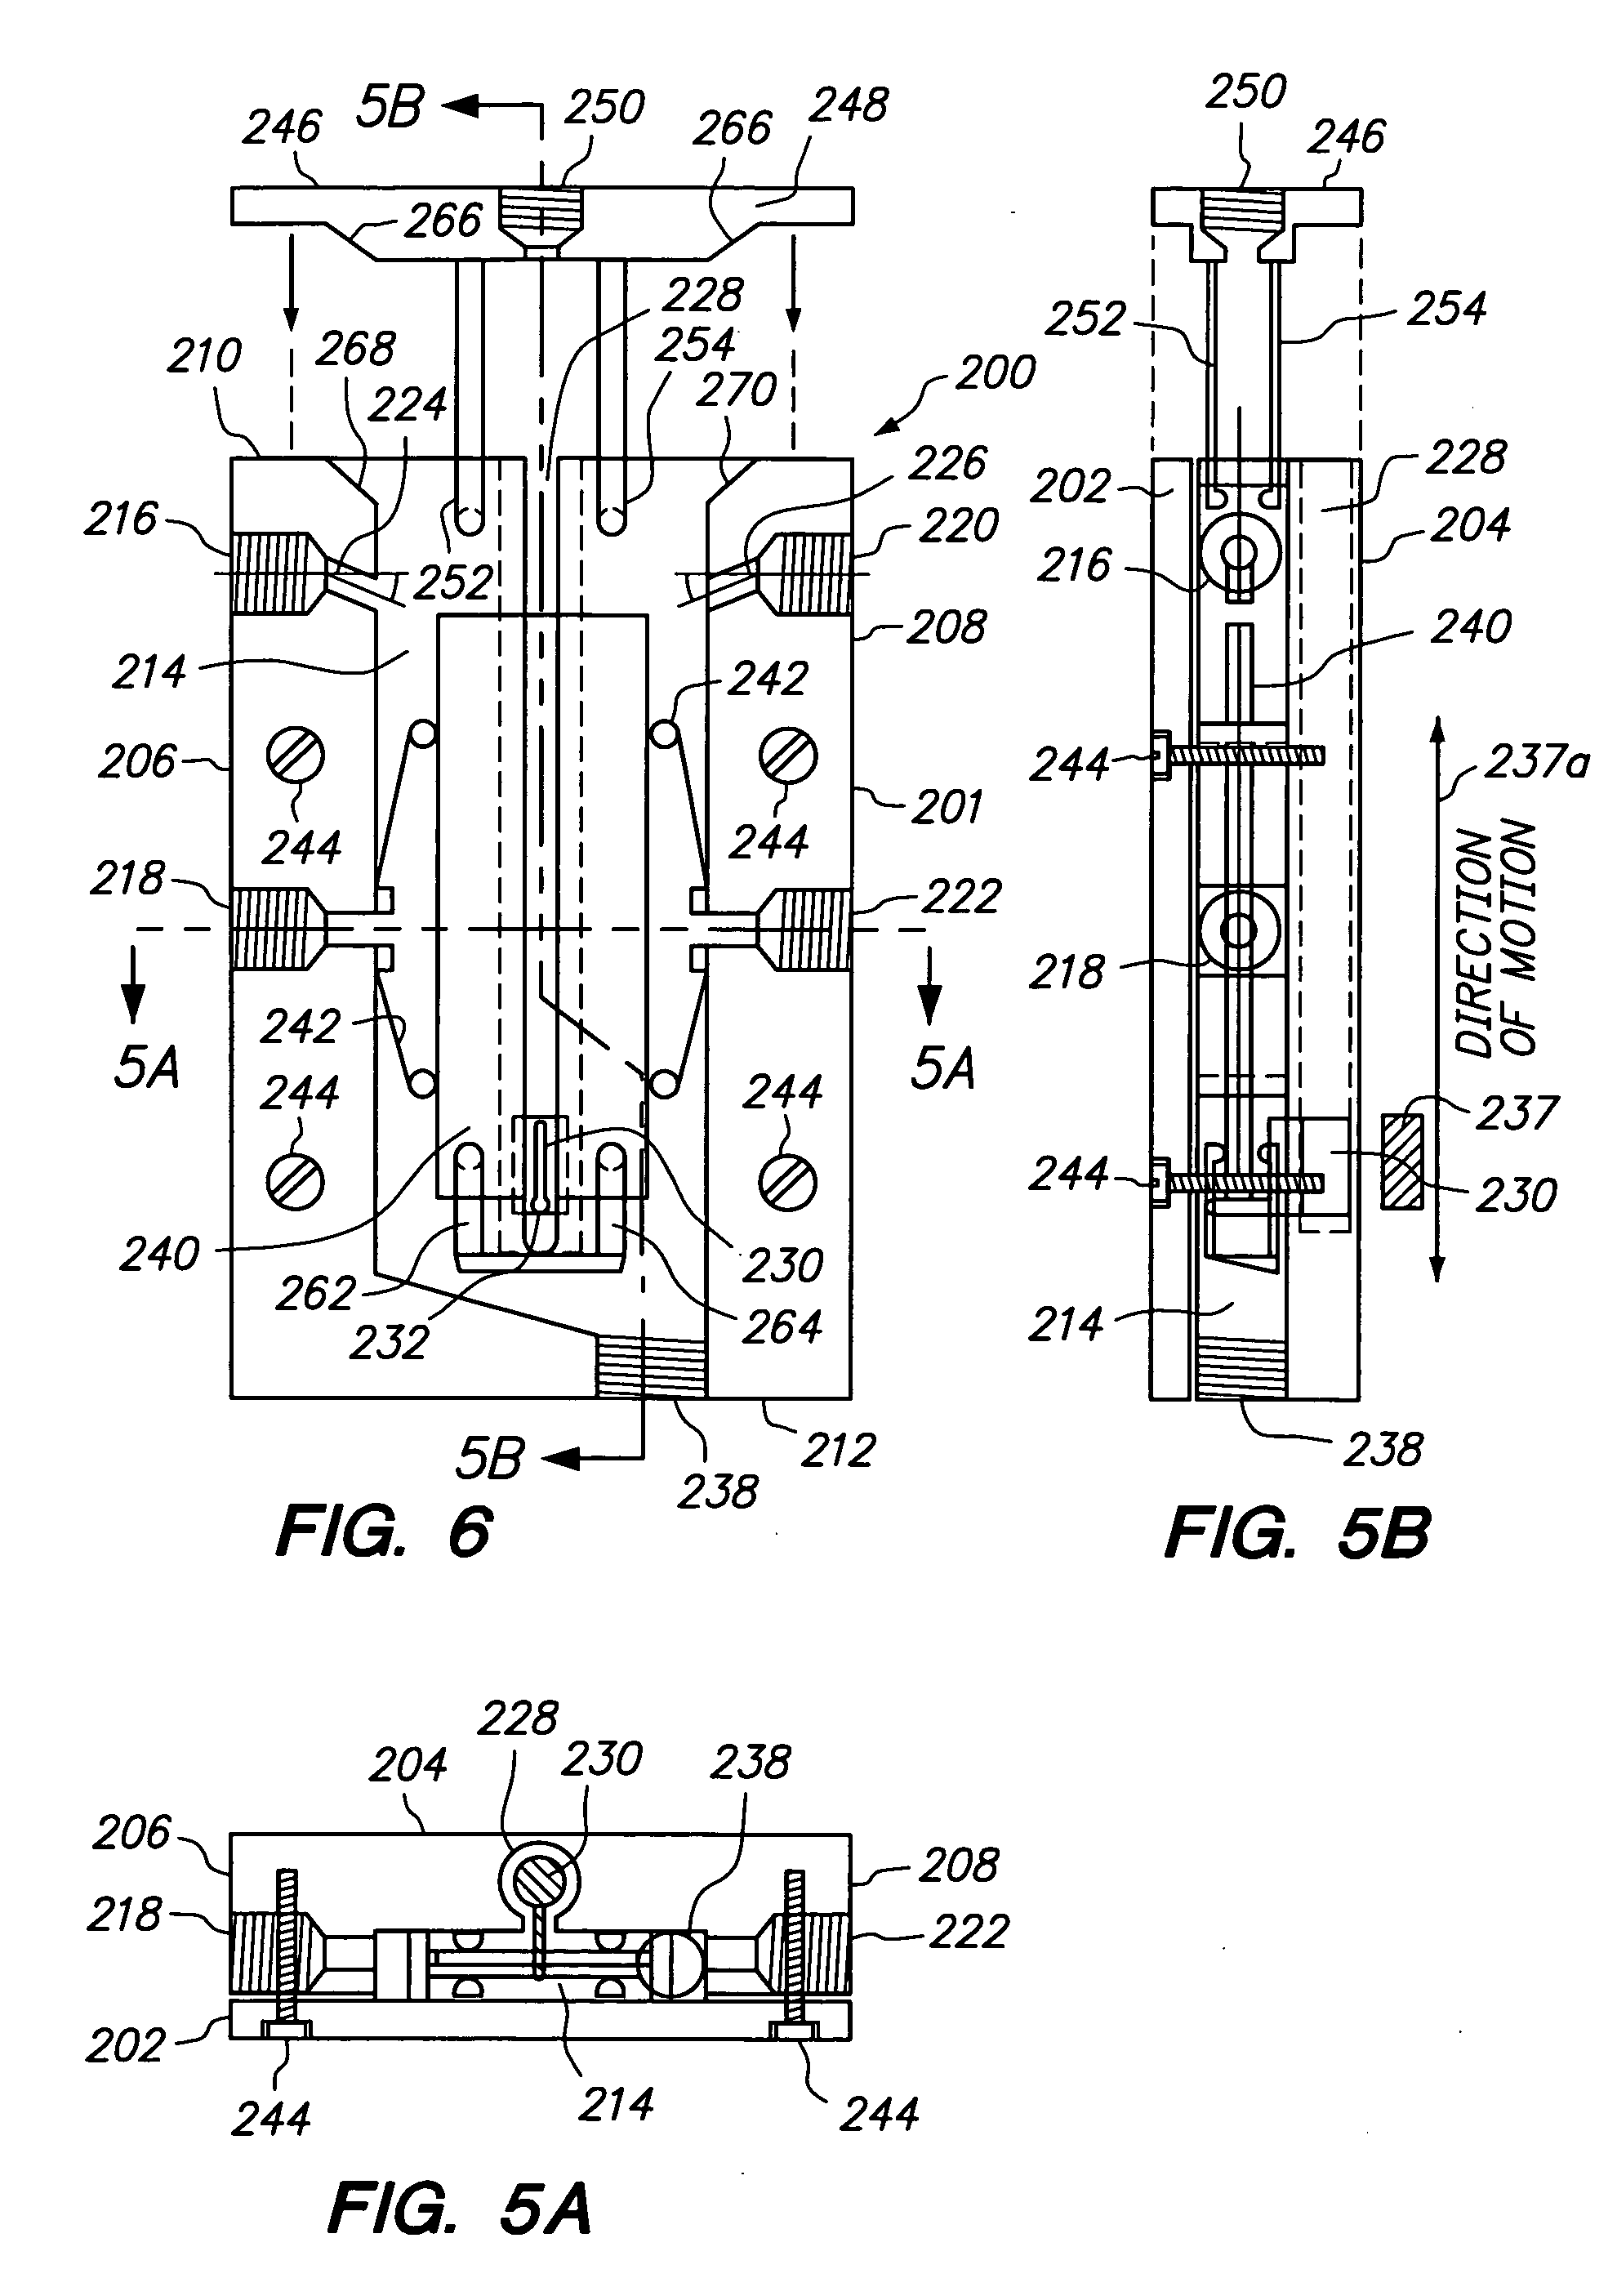 Apparatus for substrate handling